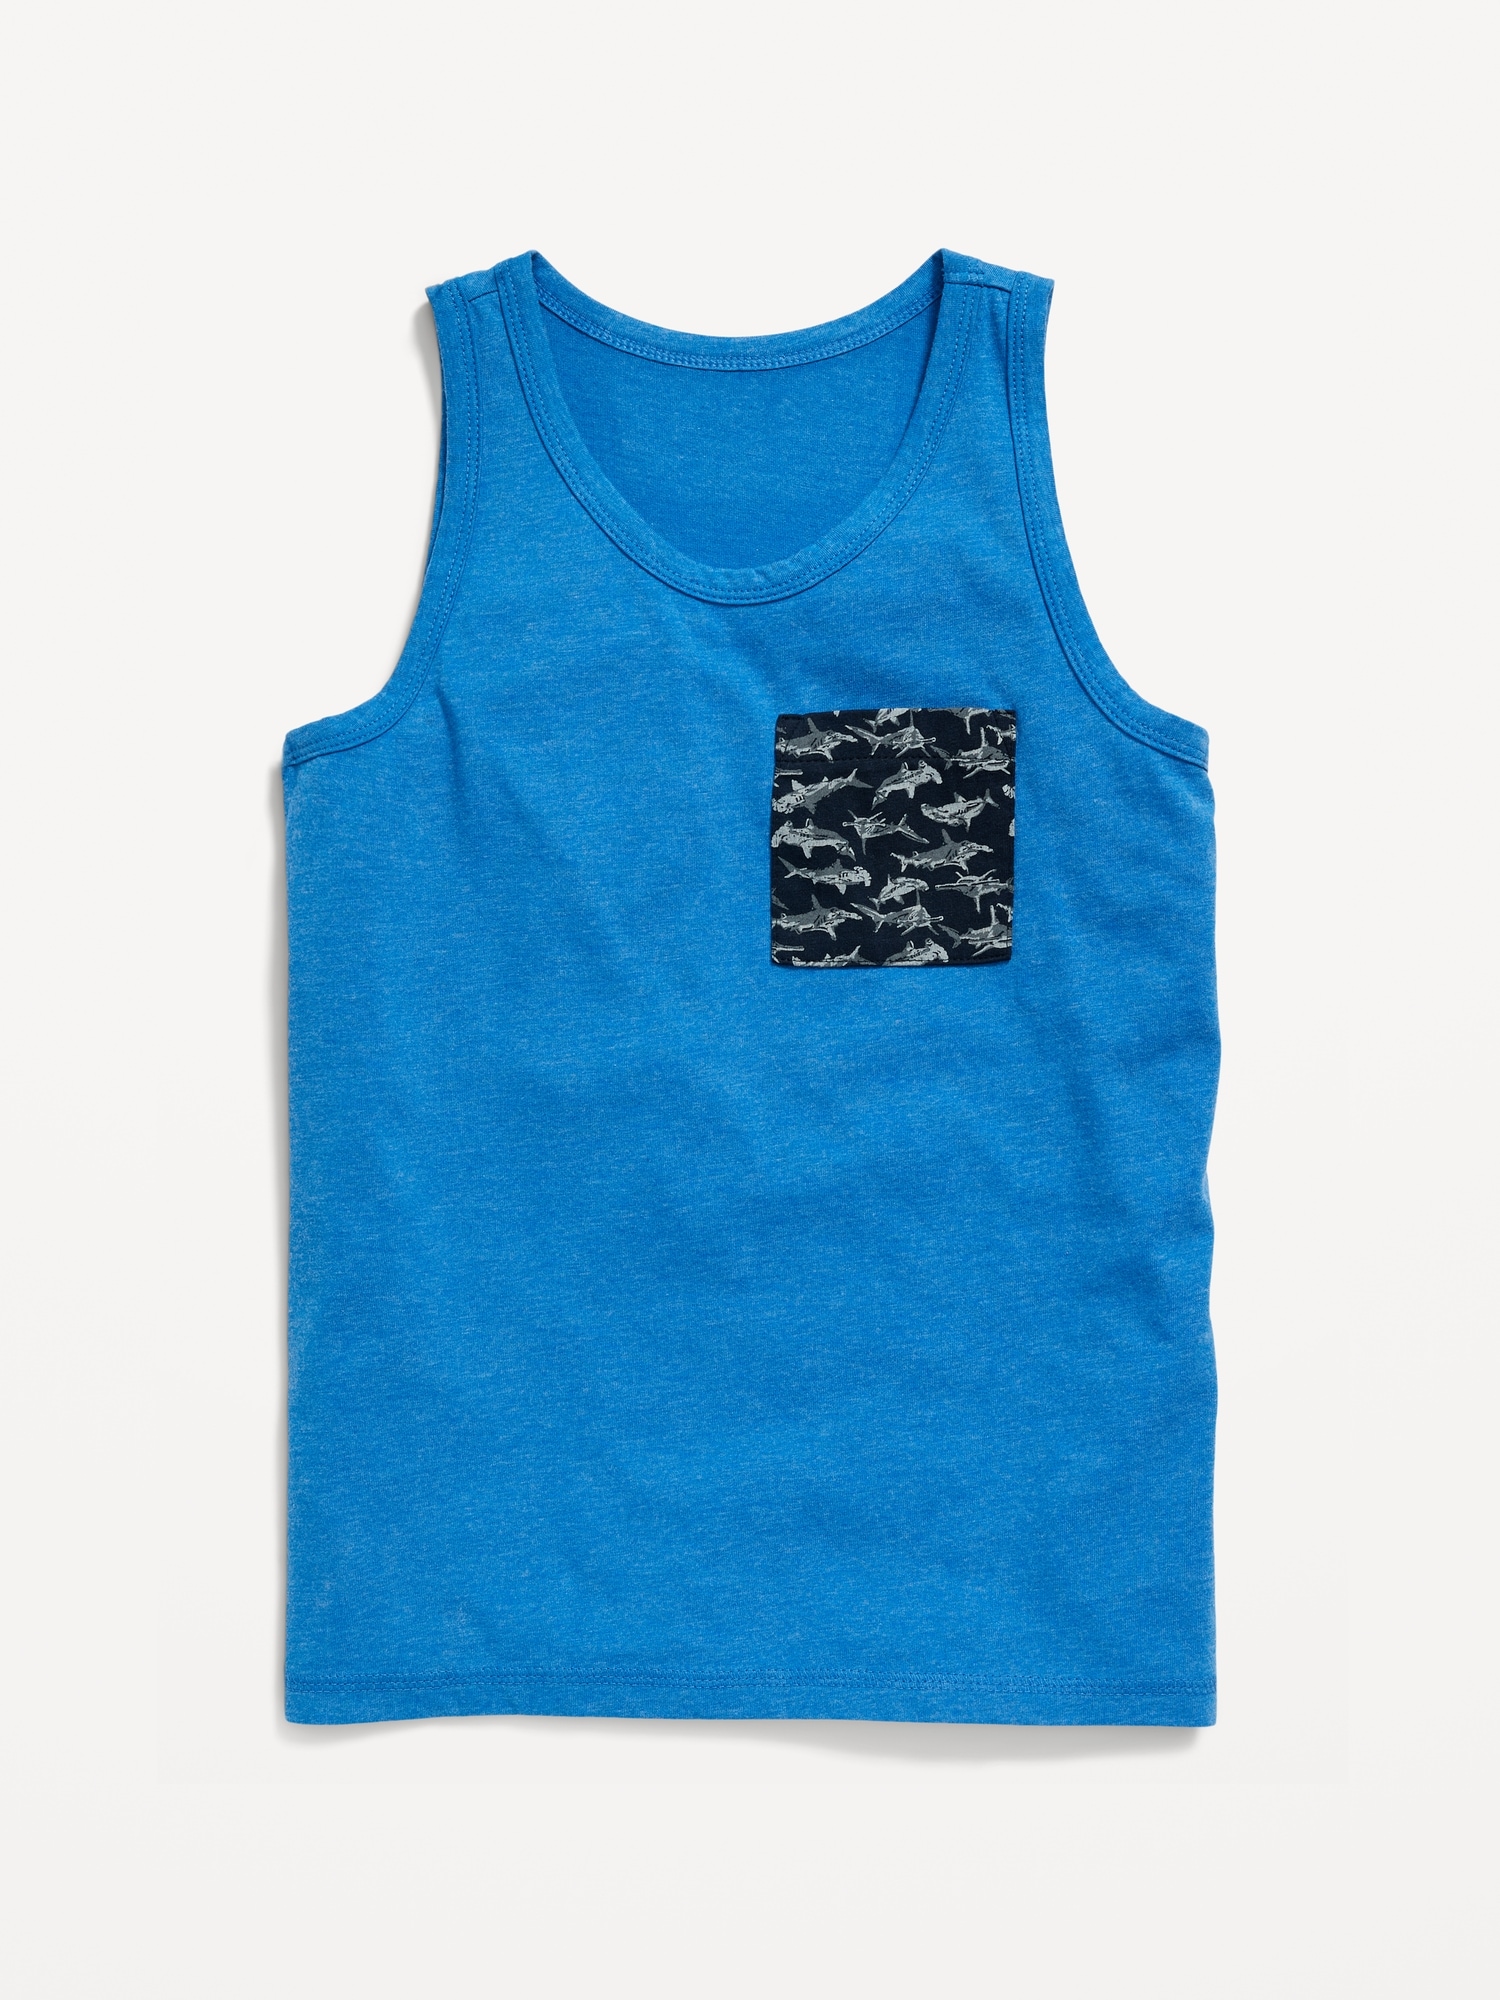 Softest Printed-Pocket Tank Top for Boys | Old Navy